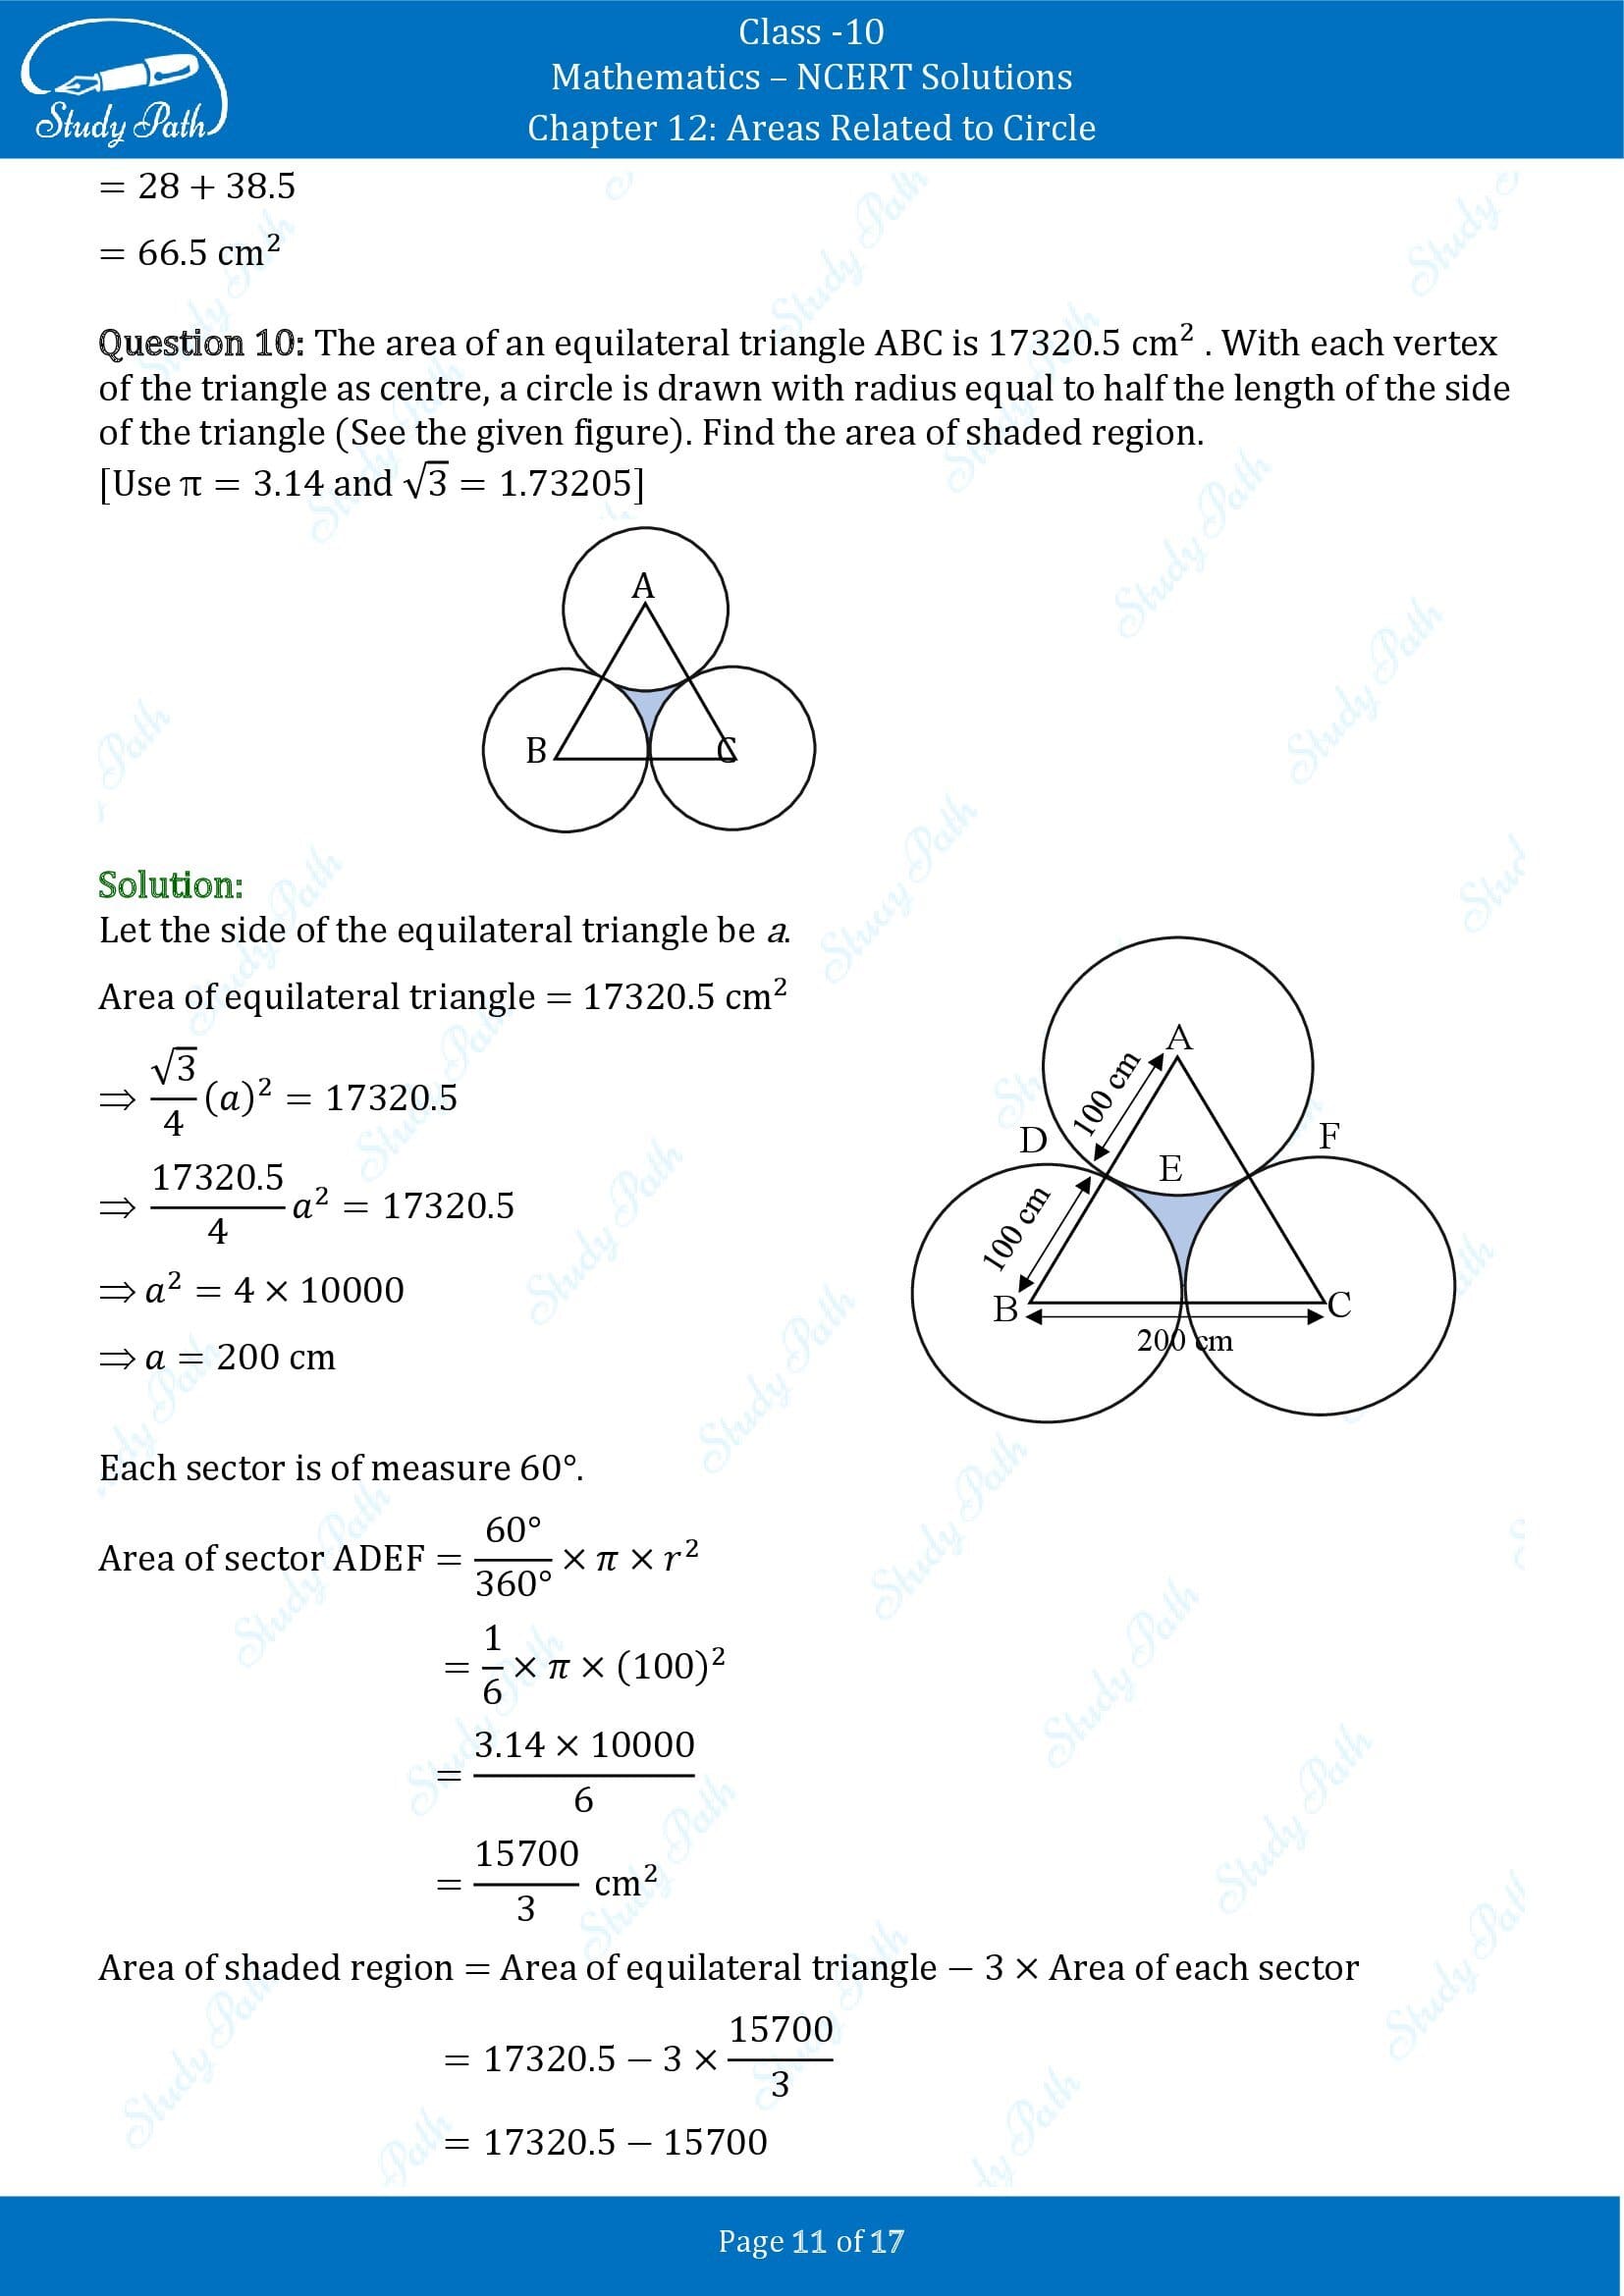 NCERT Solutions for Class 10 Maths Chapter 12 Areas Related to Circles Exercise 12.3 00011